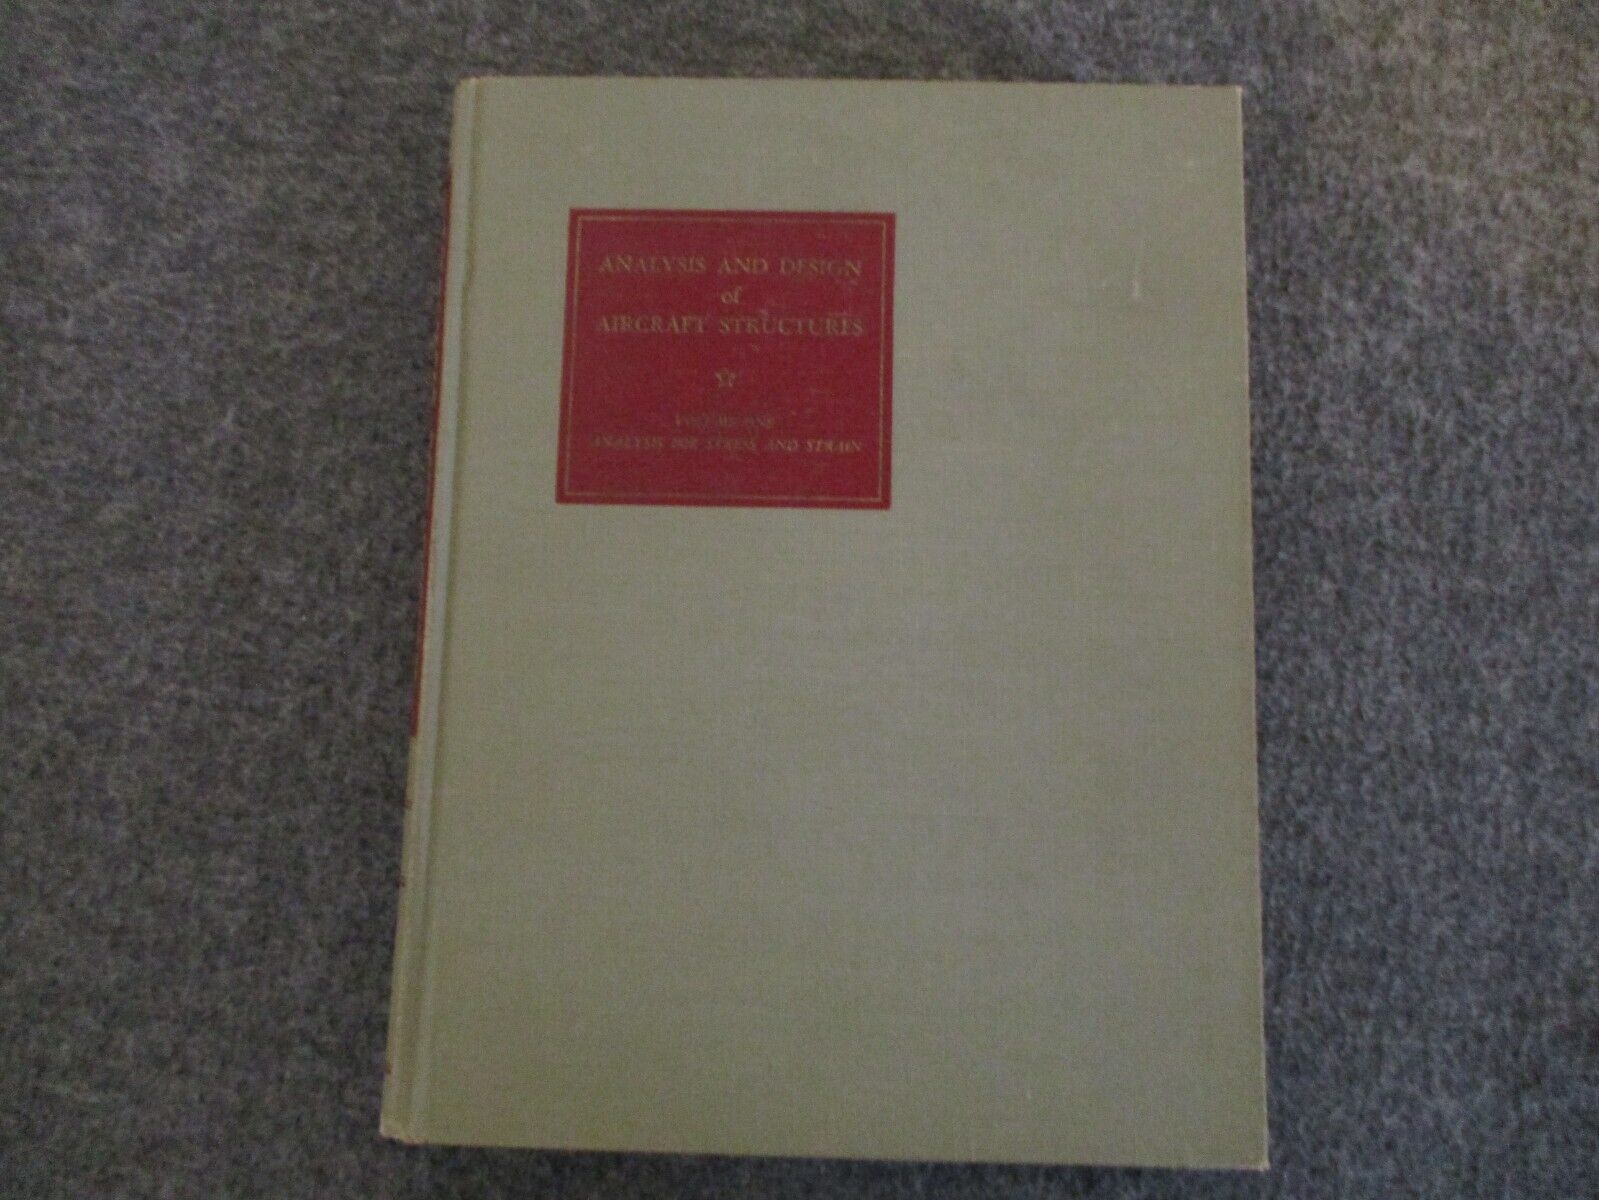 1958 ANALYSIS AND DESIGN OF AIRCRAFT STRUCTURES VOL ONE HARDCOVER by E.F. BRUHN